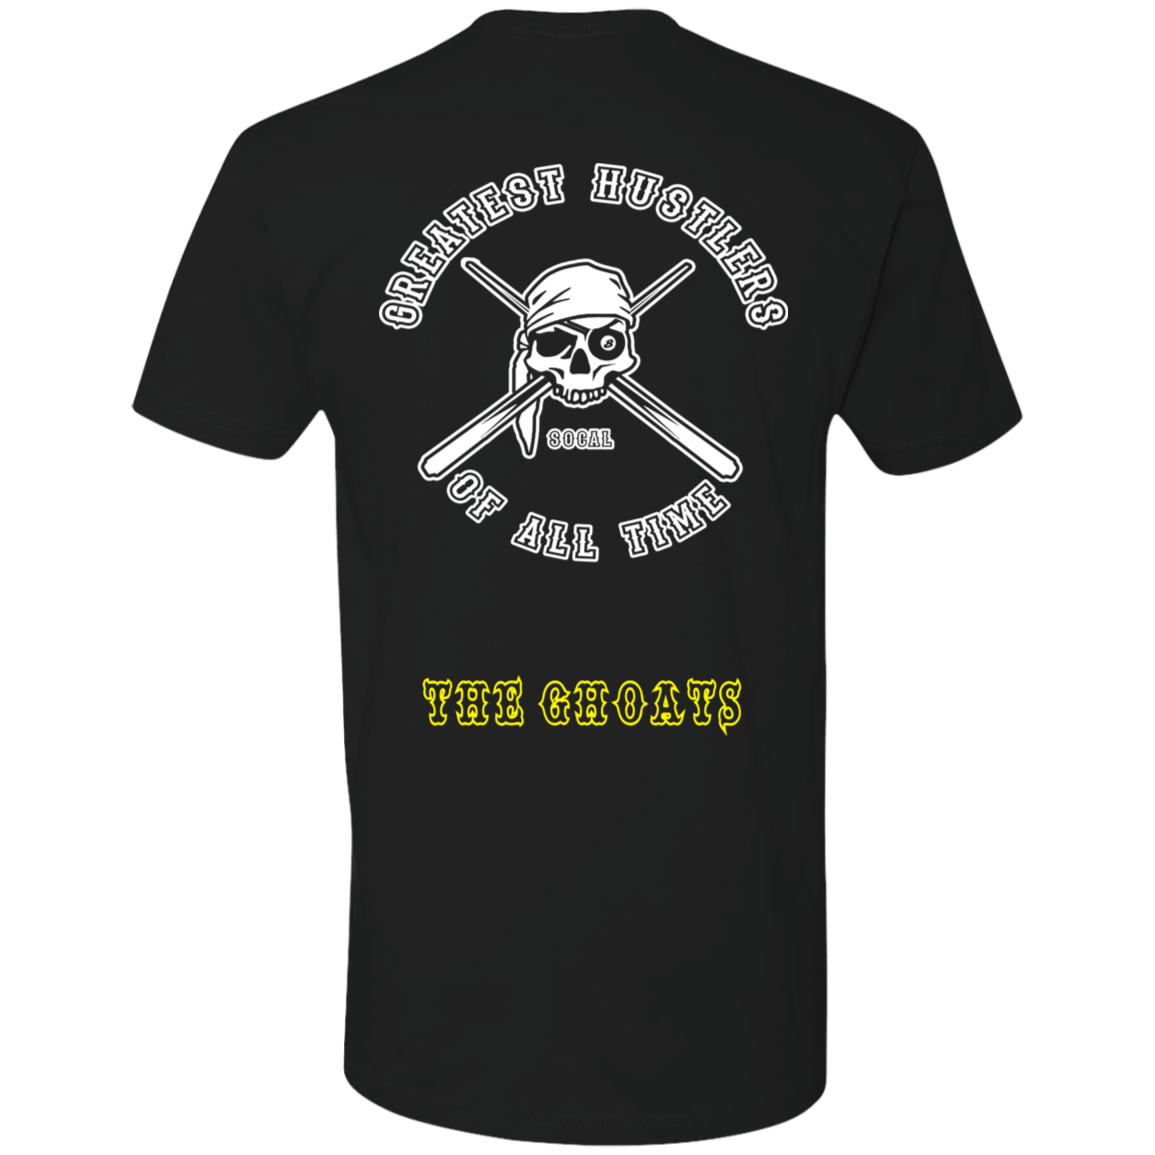 The GHOATS Custom Design. #4 Motorcycle Club Style. Ver 1/2. Ultra Soft Cotton T-Shirt